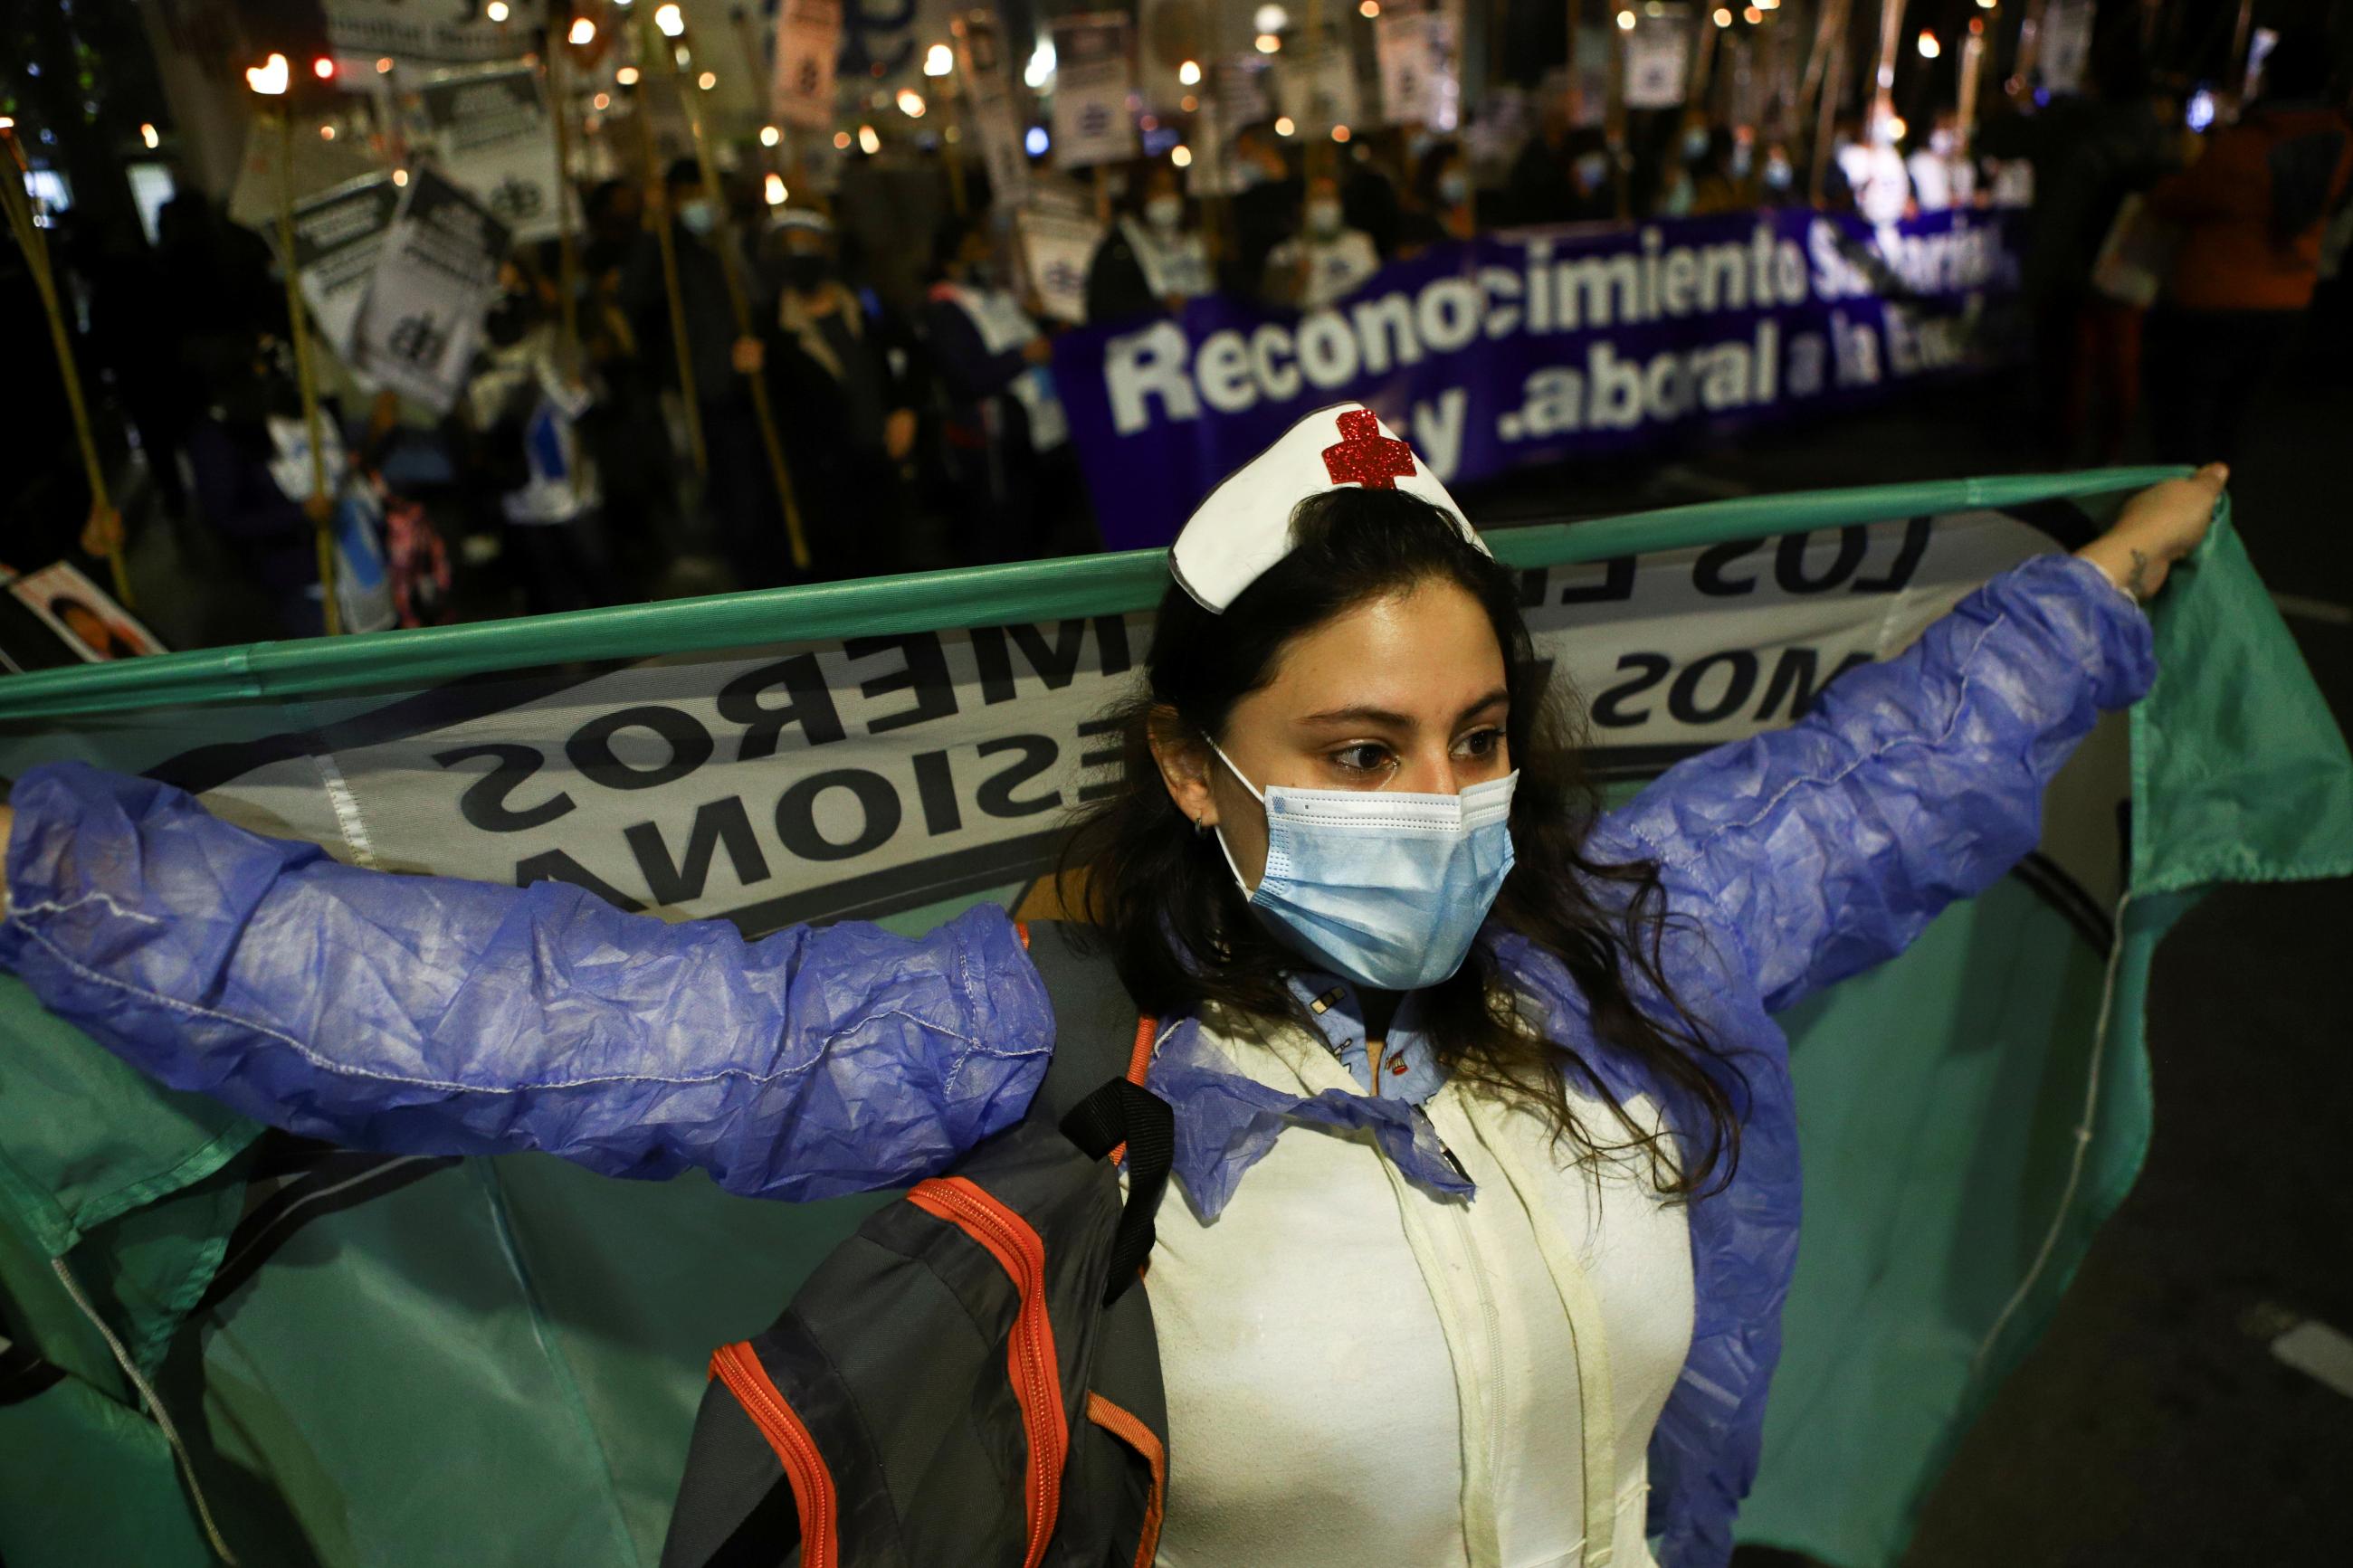 A nurse protests with other nurses in Buenos Aires, Argentina in May 2021. She is holding her arms out to the side carrying a protest banner.